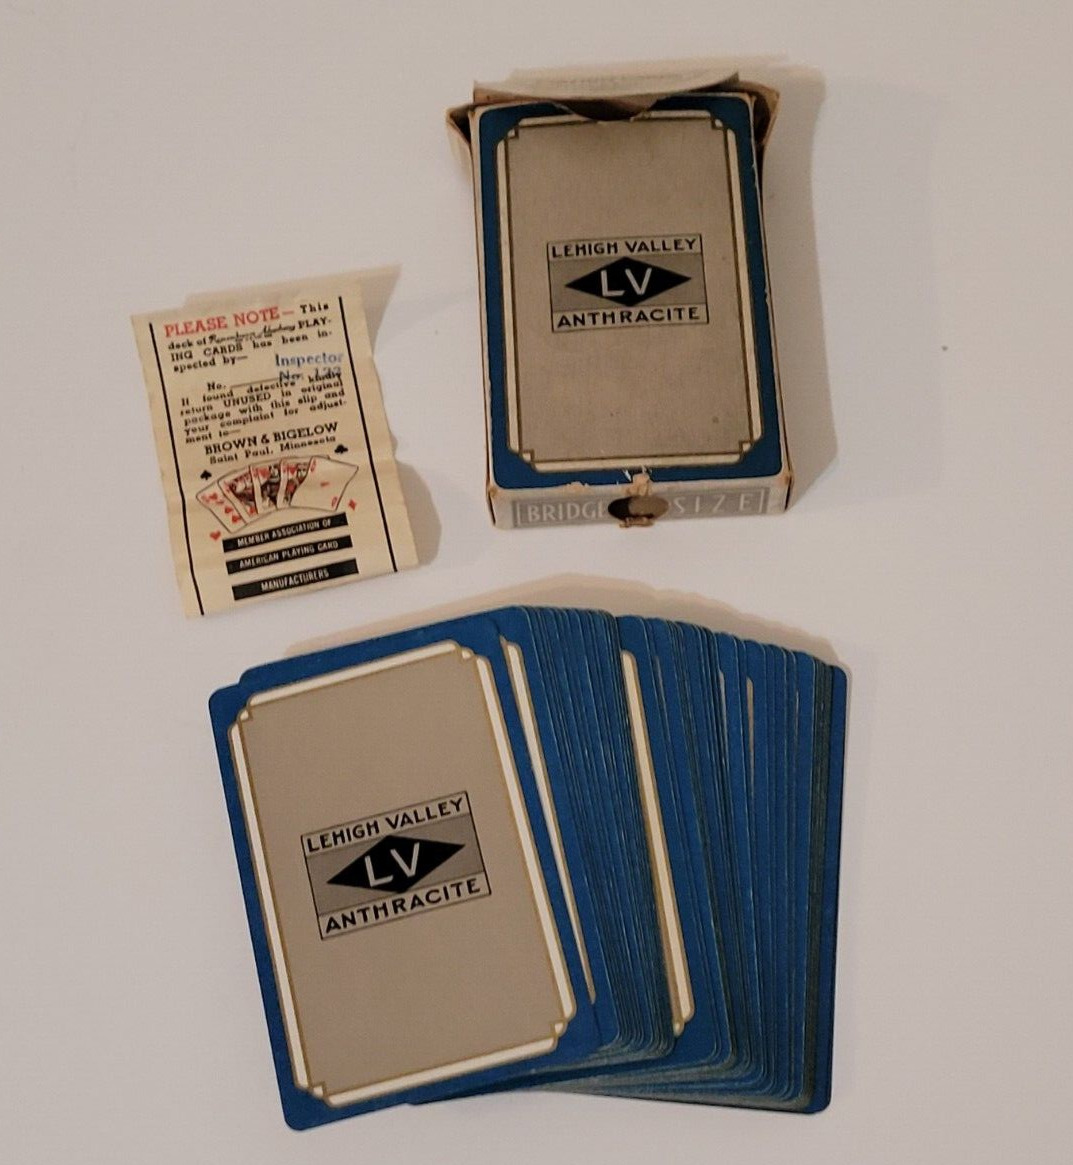 RARE Vintage 1939 Lehigh Valley LV Anthracite Railroad Playing Cards Deck